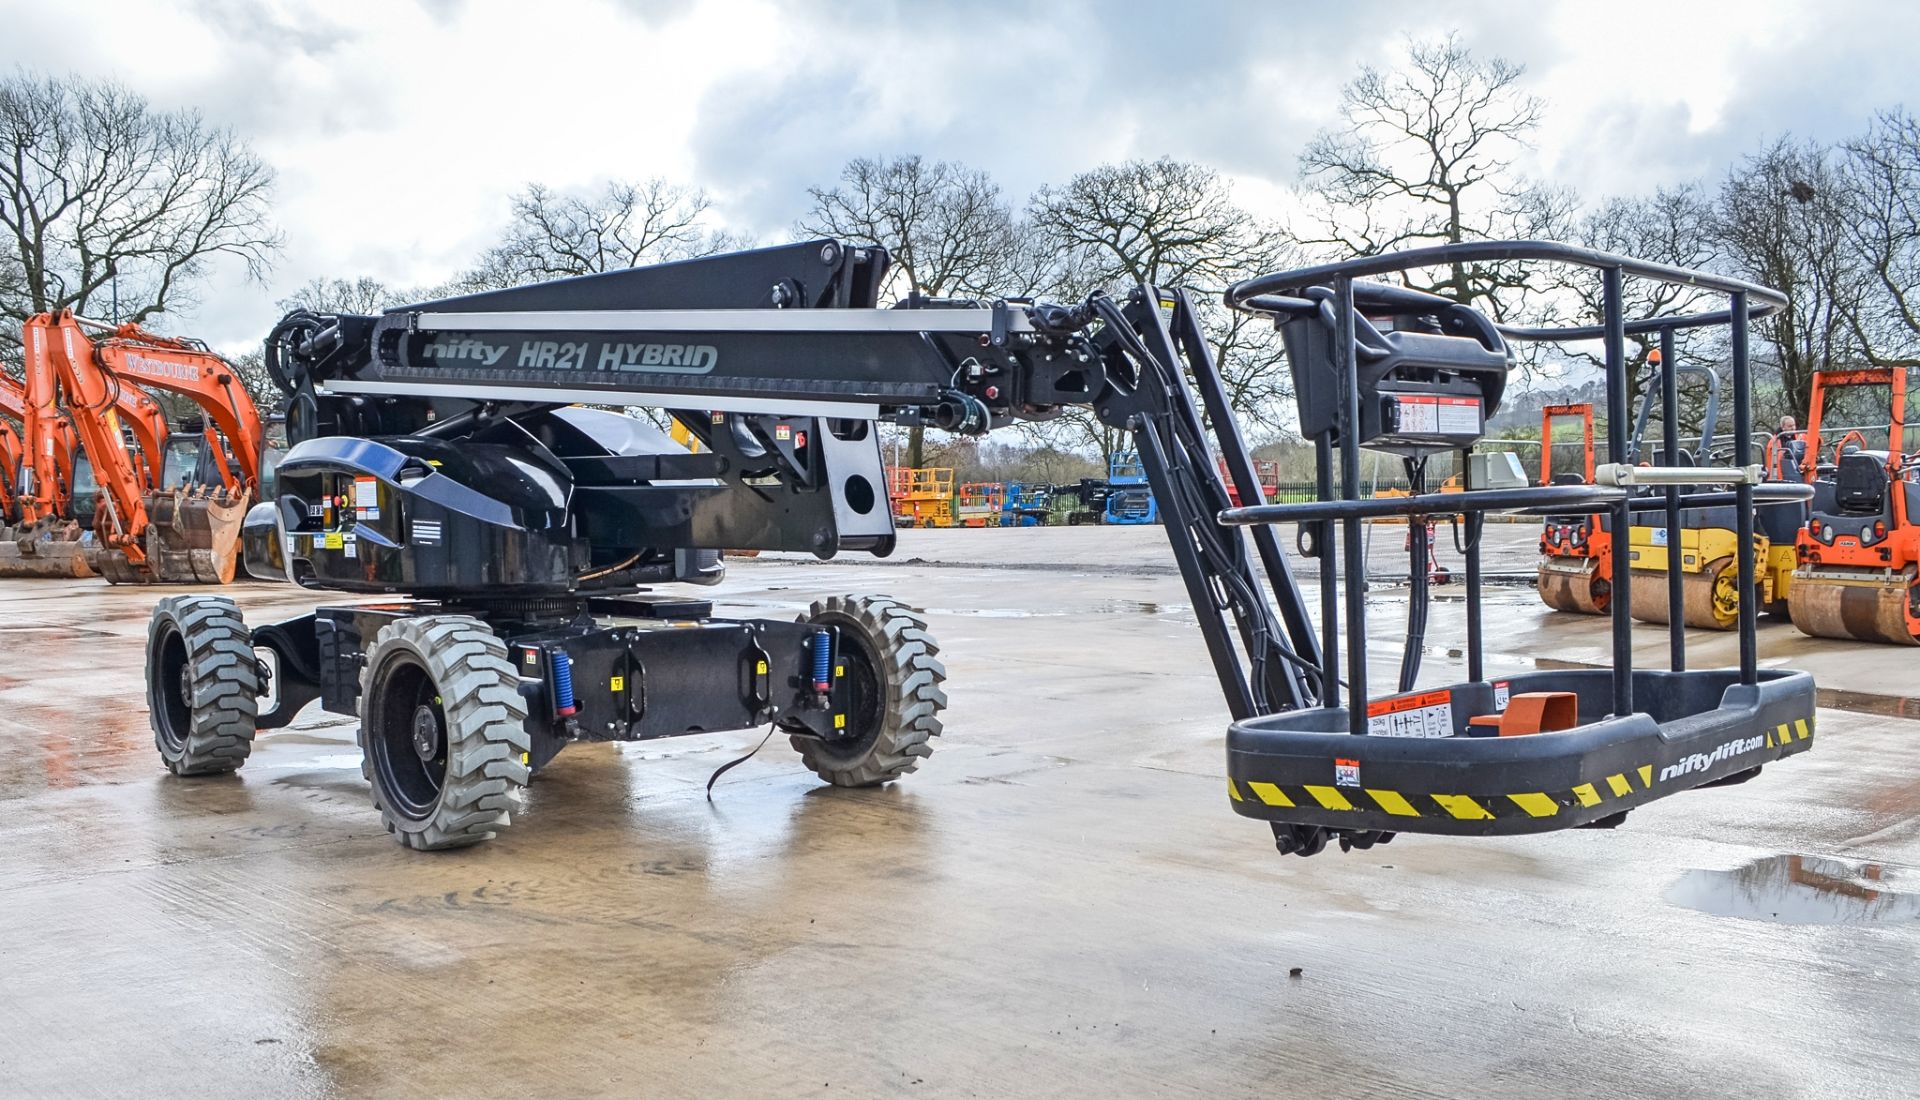 Nifty HR21 Hybrid diesel/battery electric 4x4 rough terrain articulated boom lift access platform - Image 2 of 24